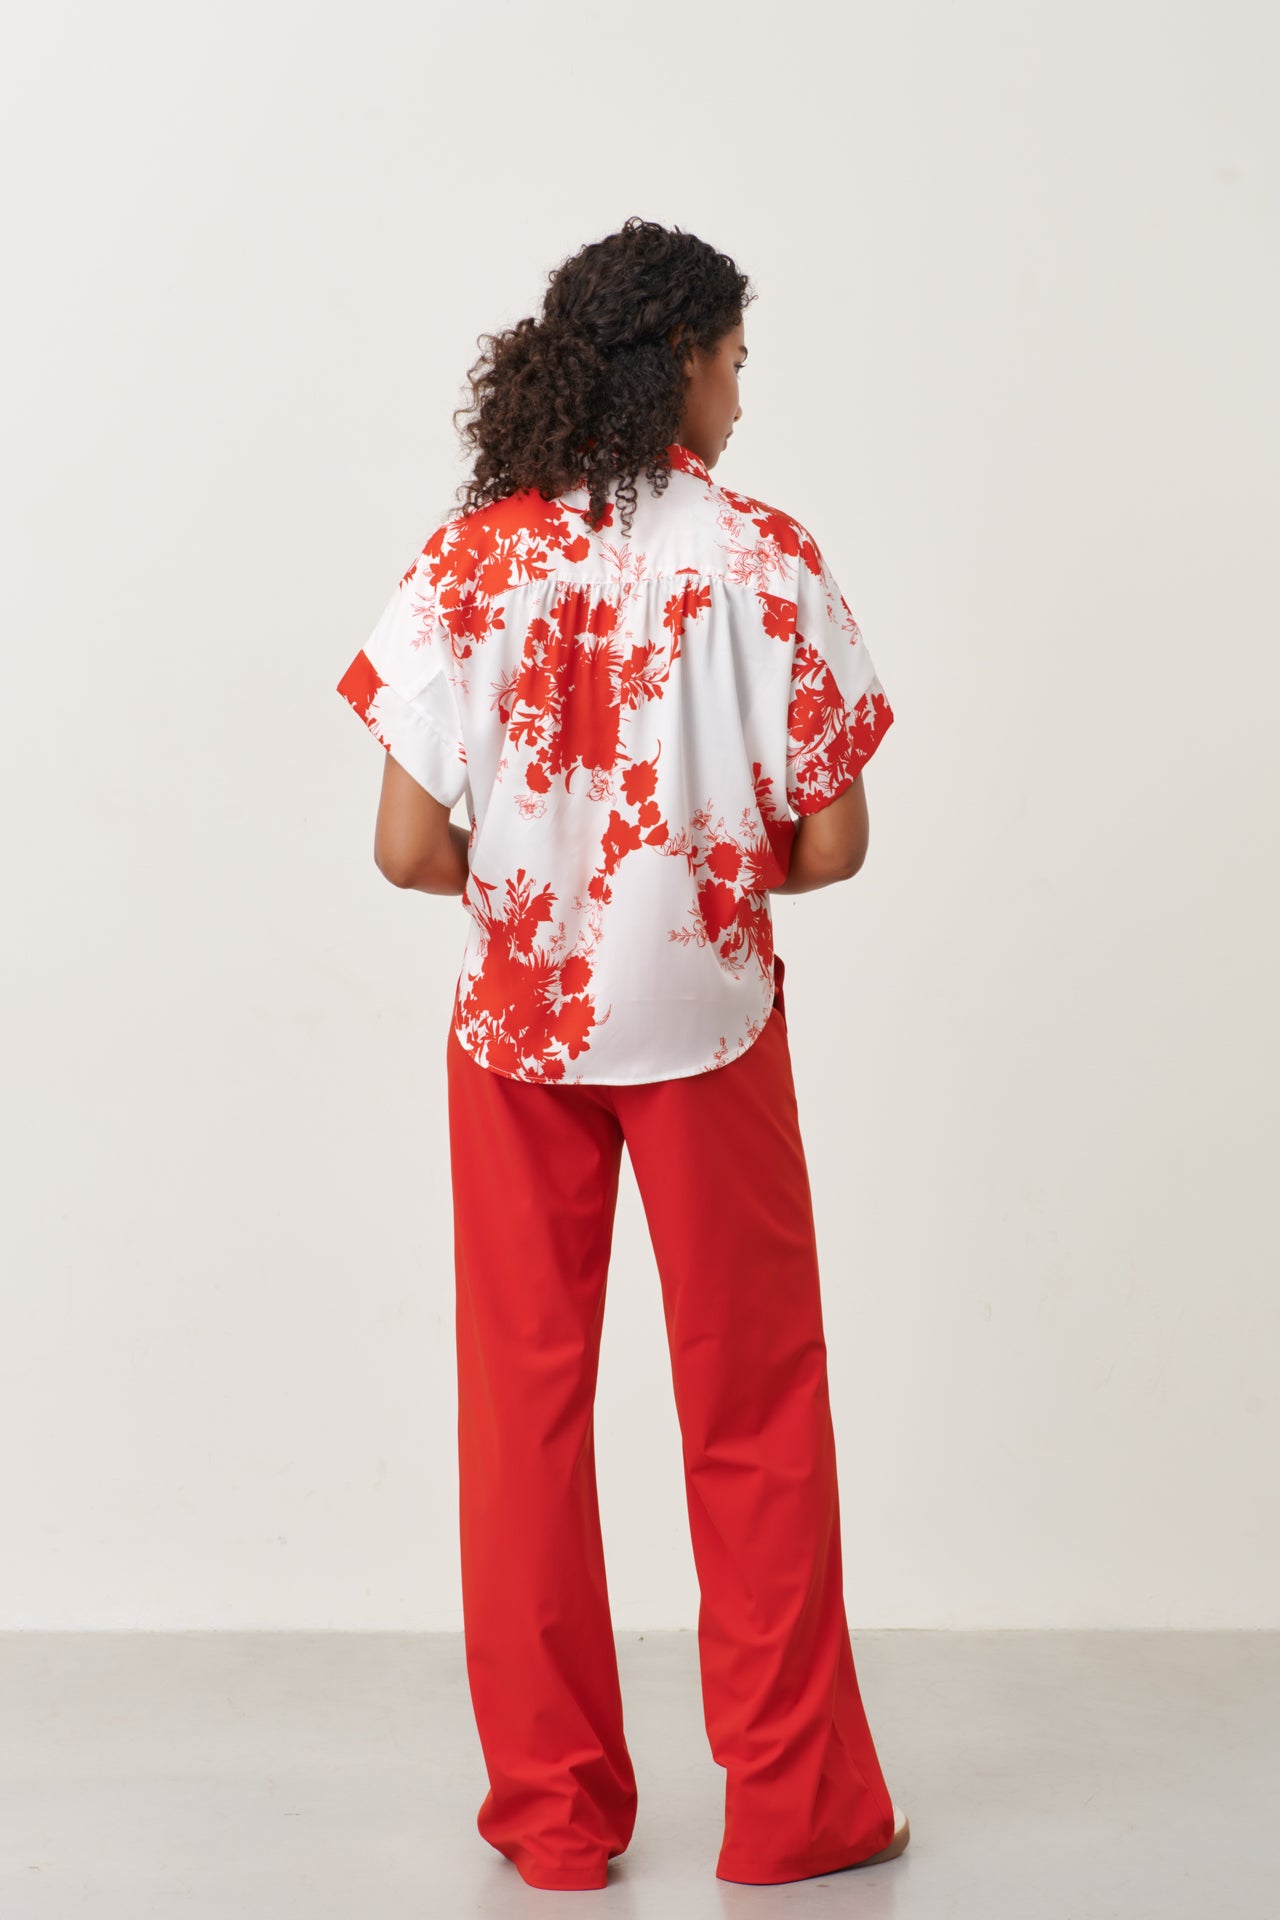 Yvette Pants Technical Jersey | Red